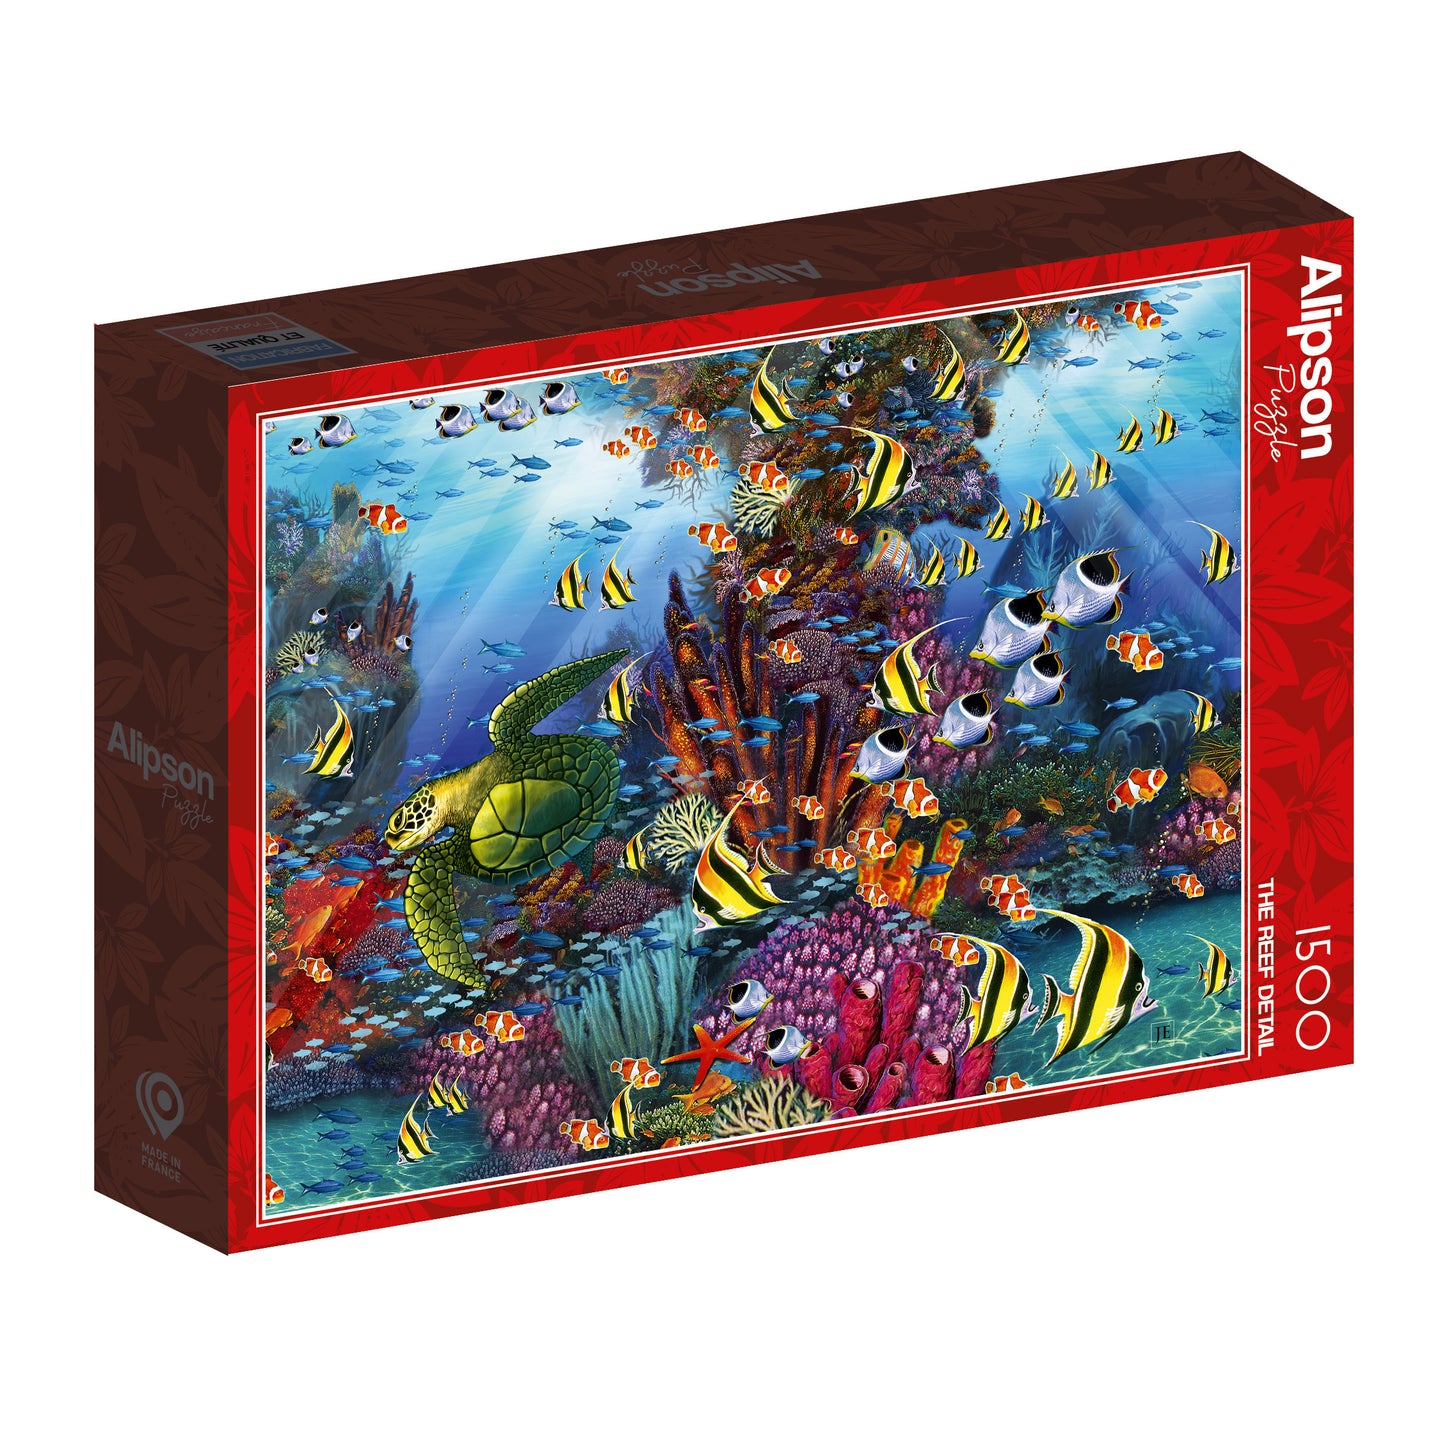 Alipson - The Reef Detail - 1500 Piece Jigsaw Puzzle